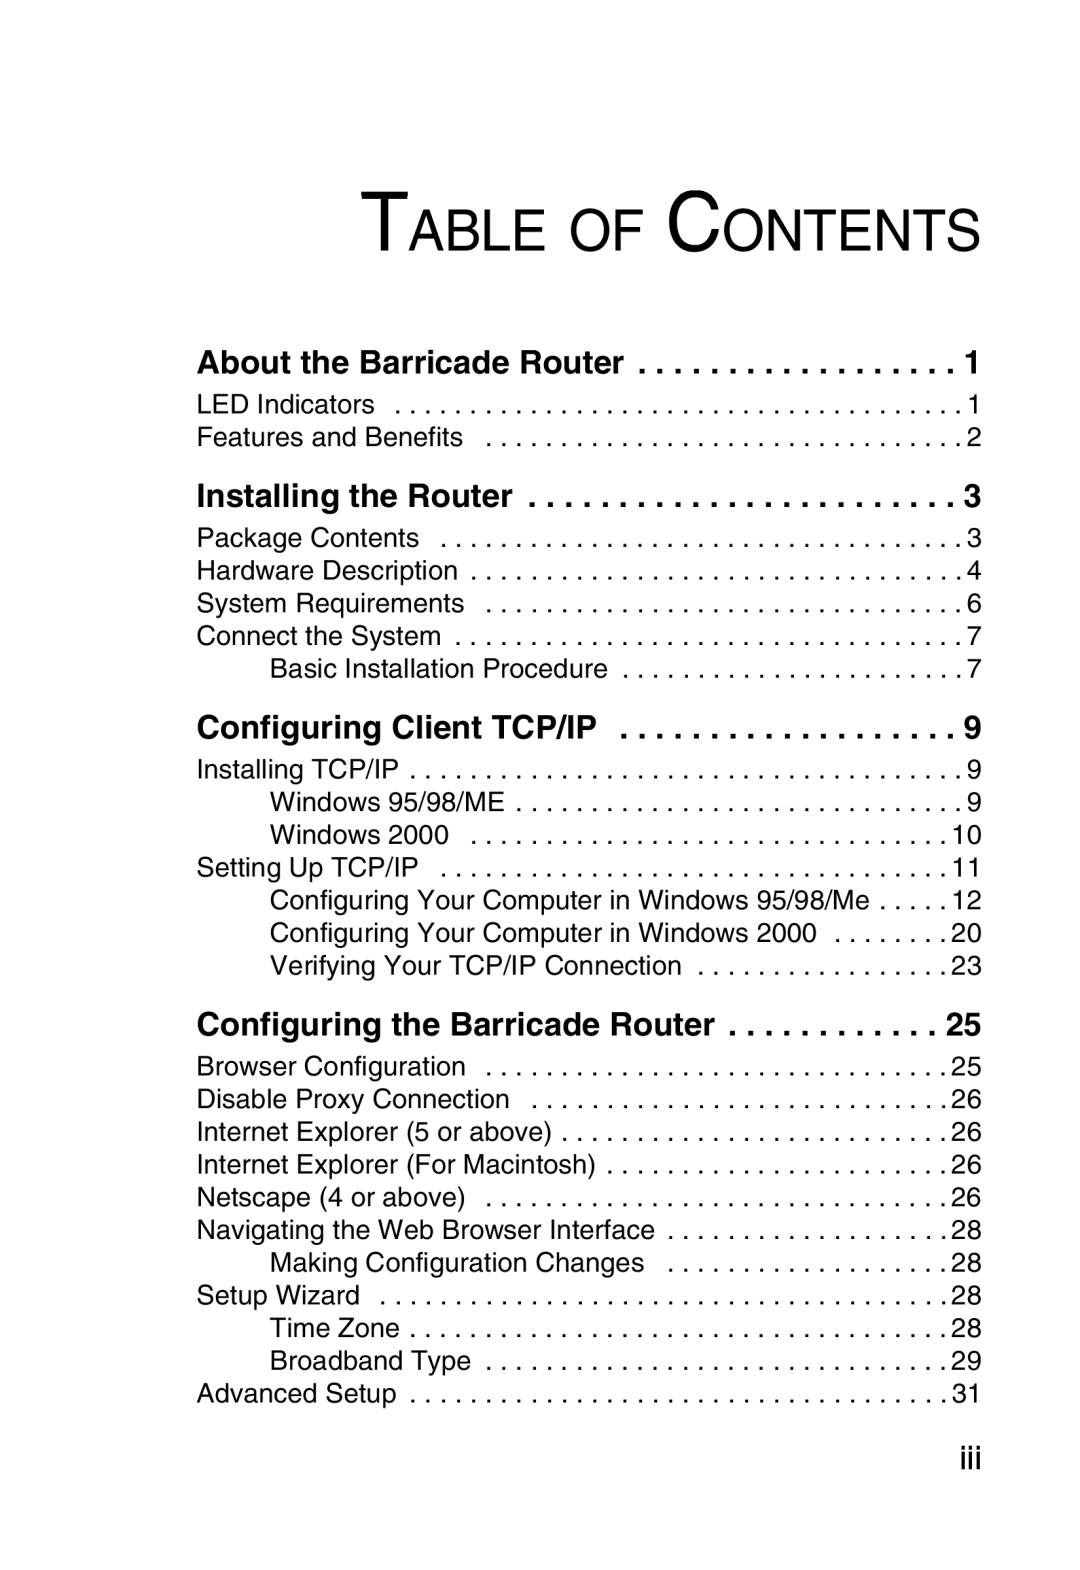 Sharp S M C 7 0 0 4 A B R Table Of Contents, About the Barricade Router, Installing the Router, Configuring Client TCP/IP 